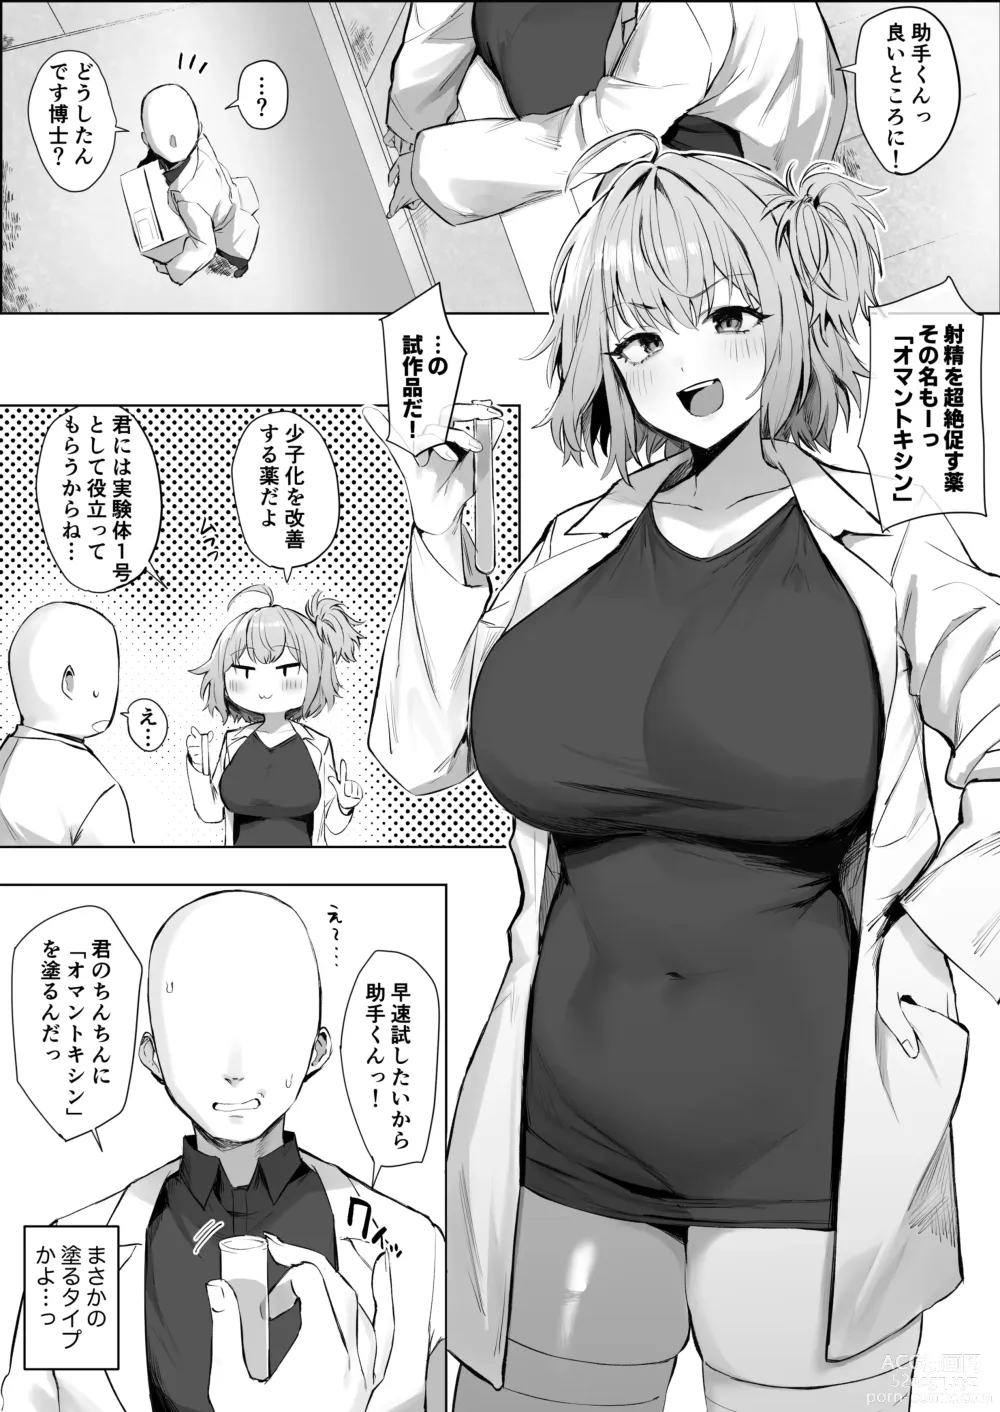 Page 1 of doujinshi Mad Scientist